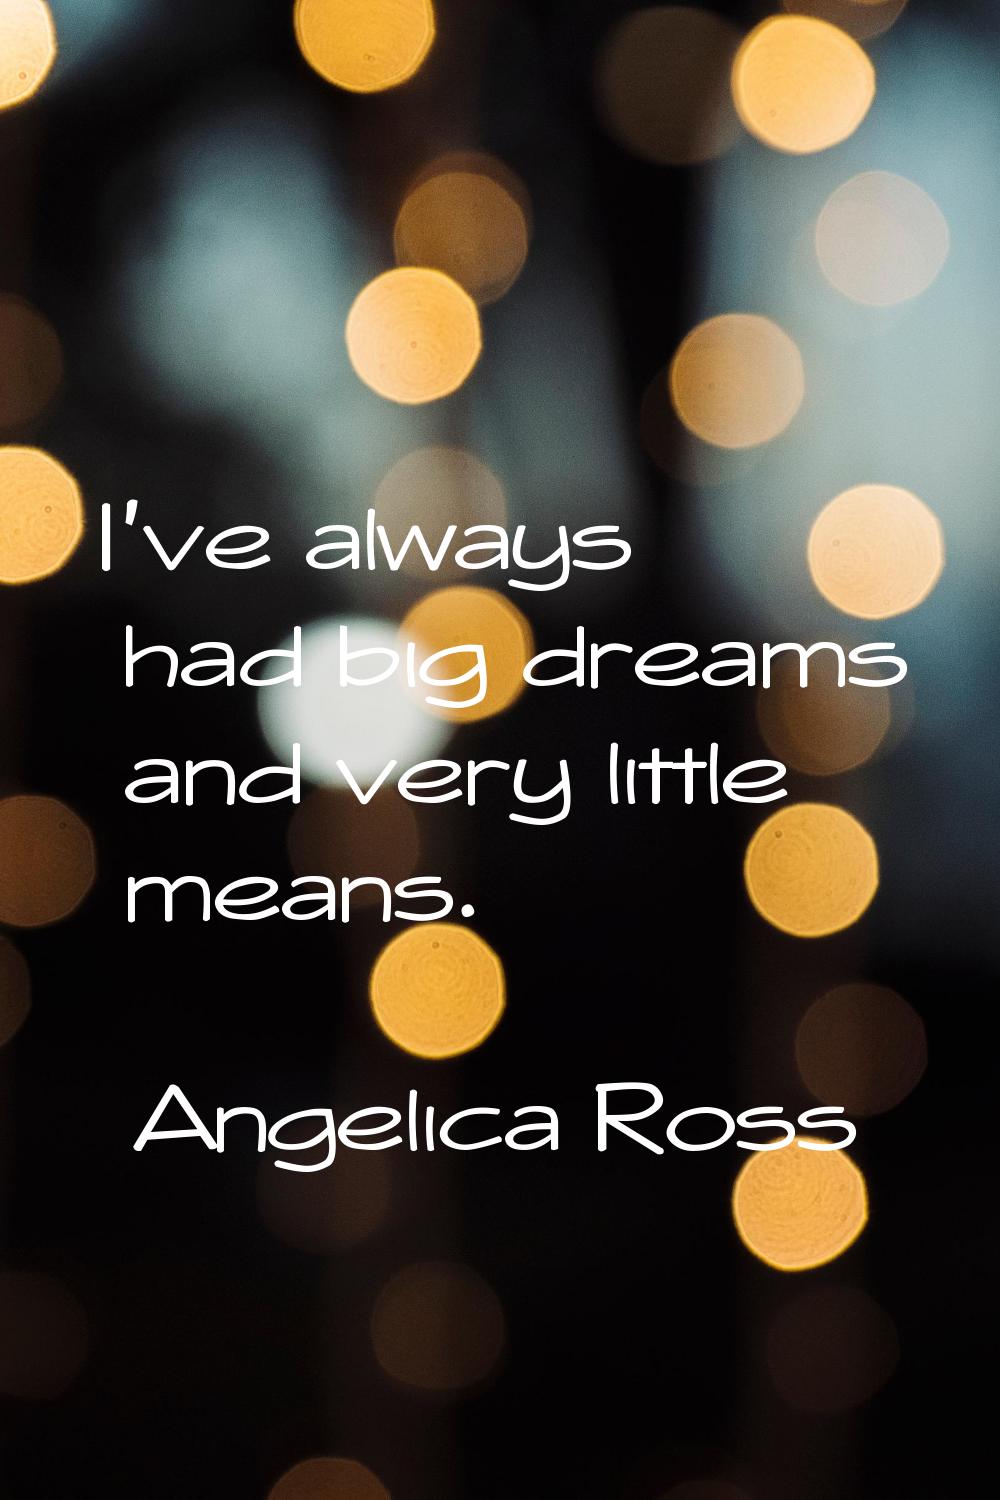 I've always had big dreams and very little means.